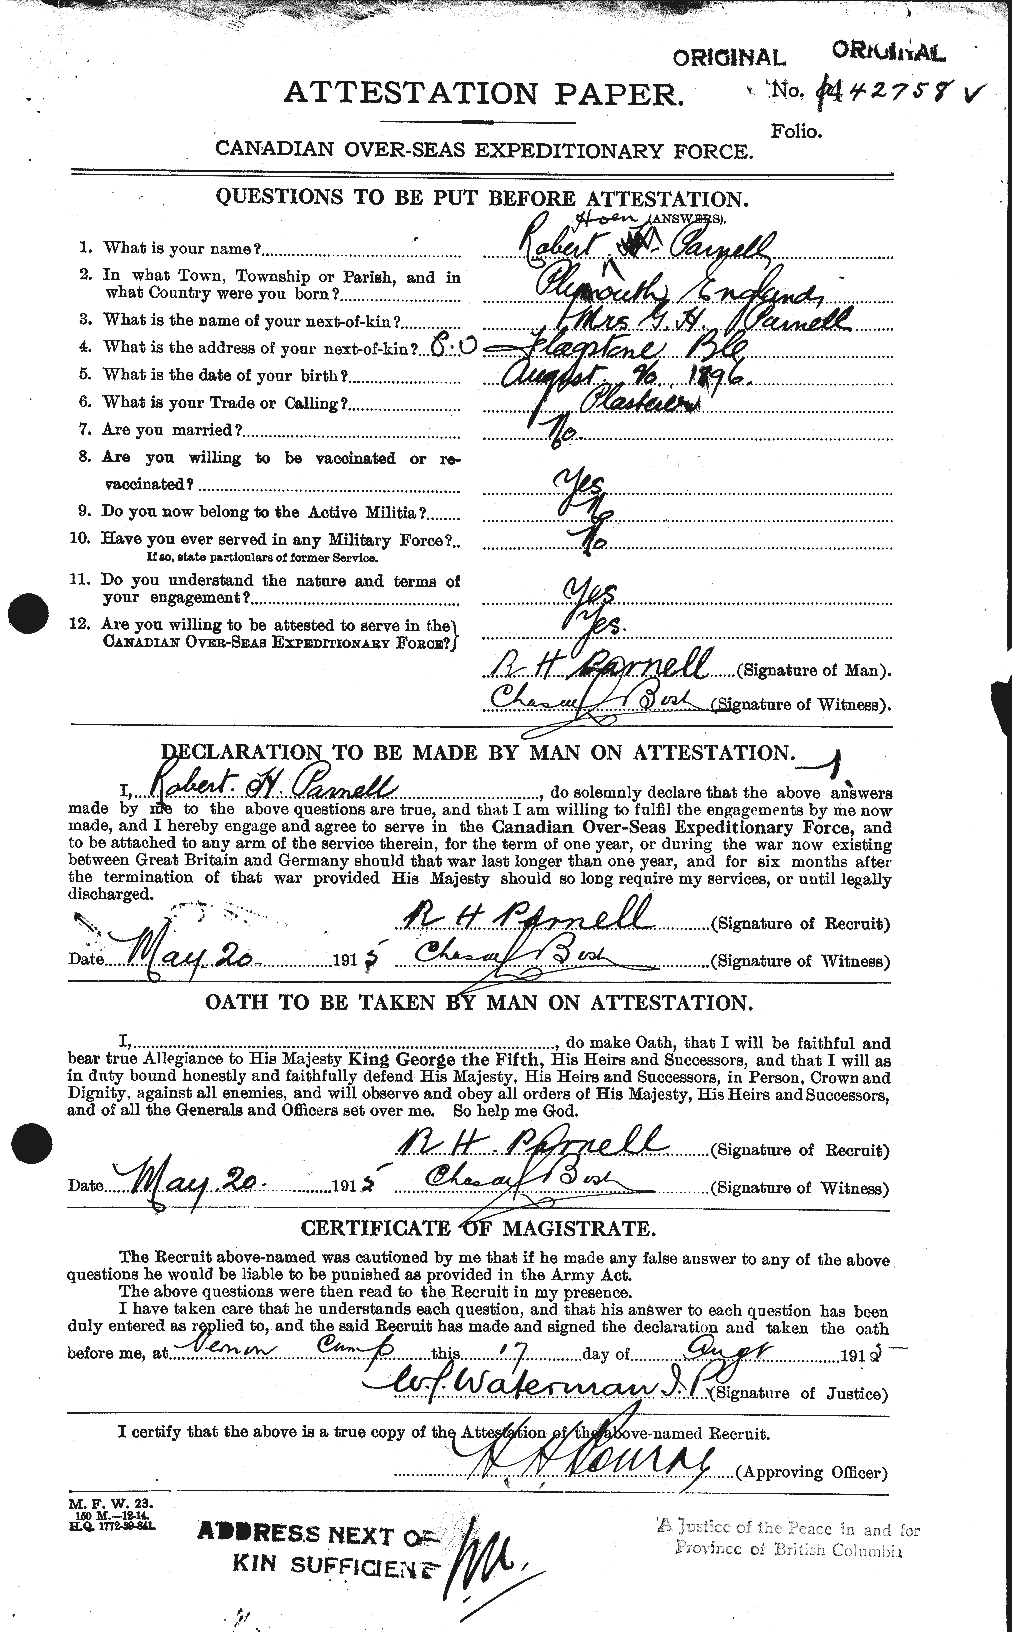 Personnel Records of the First World War - CEF 566363a